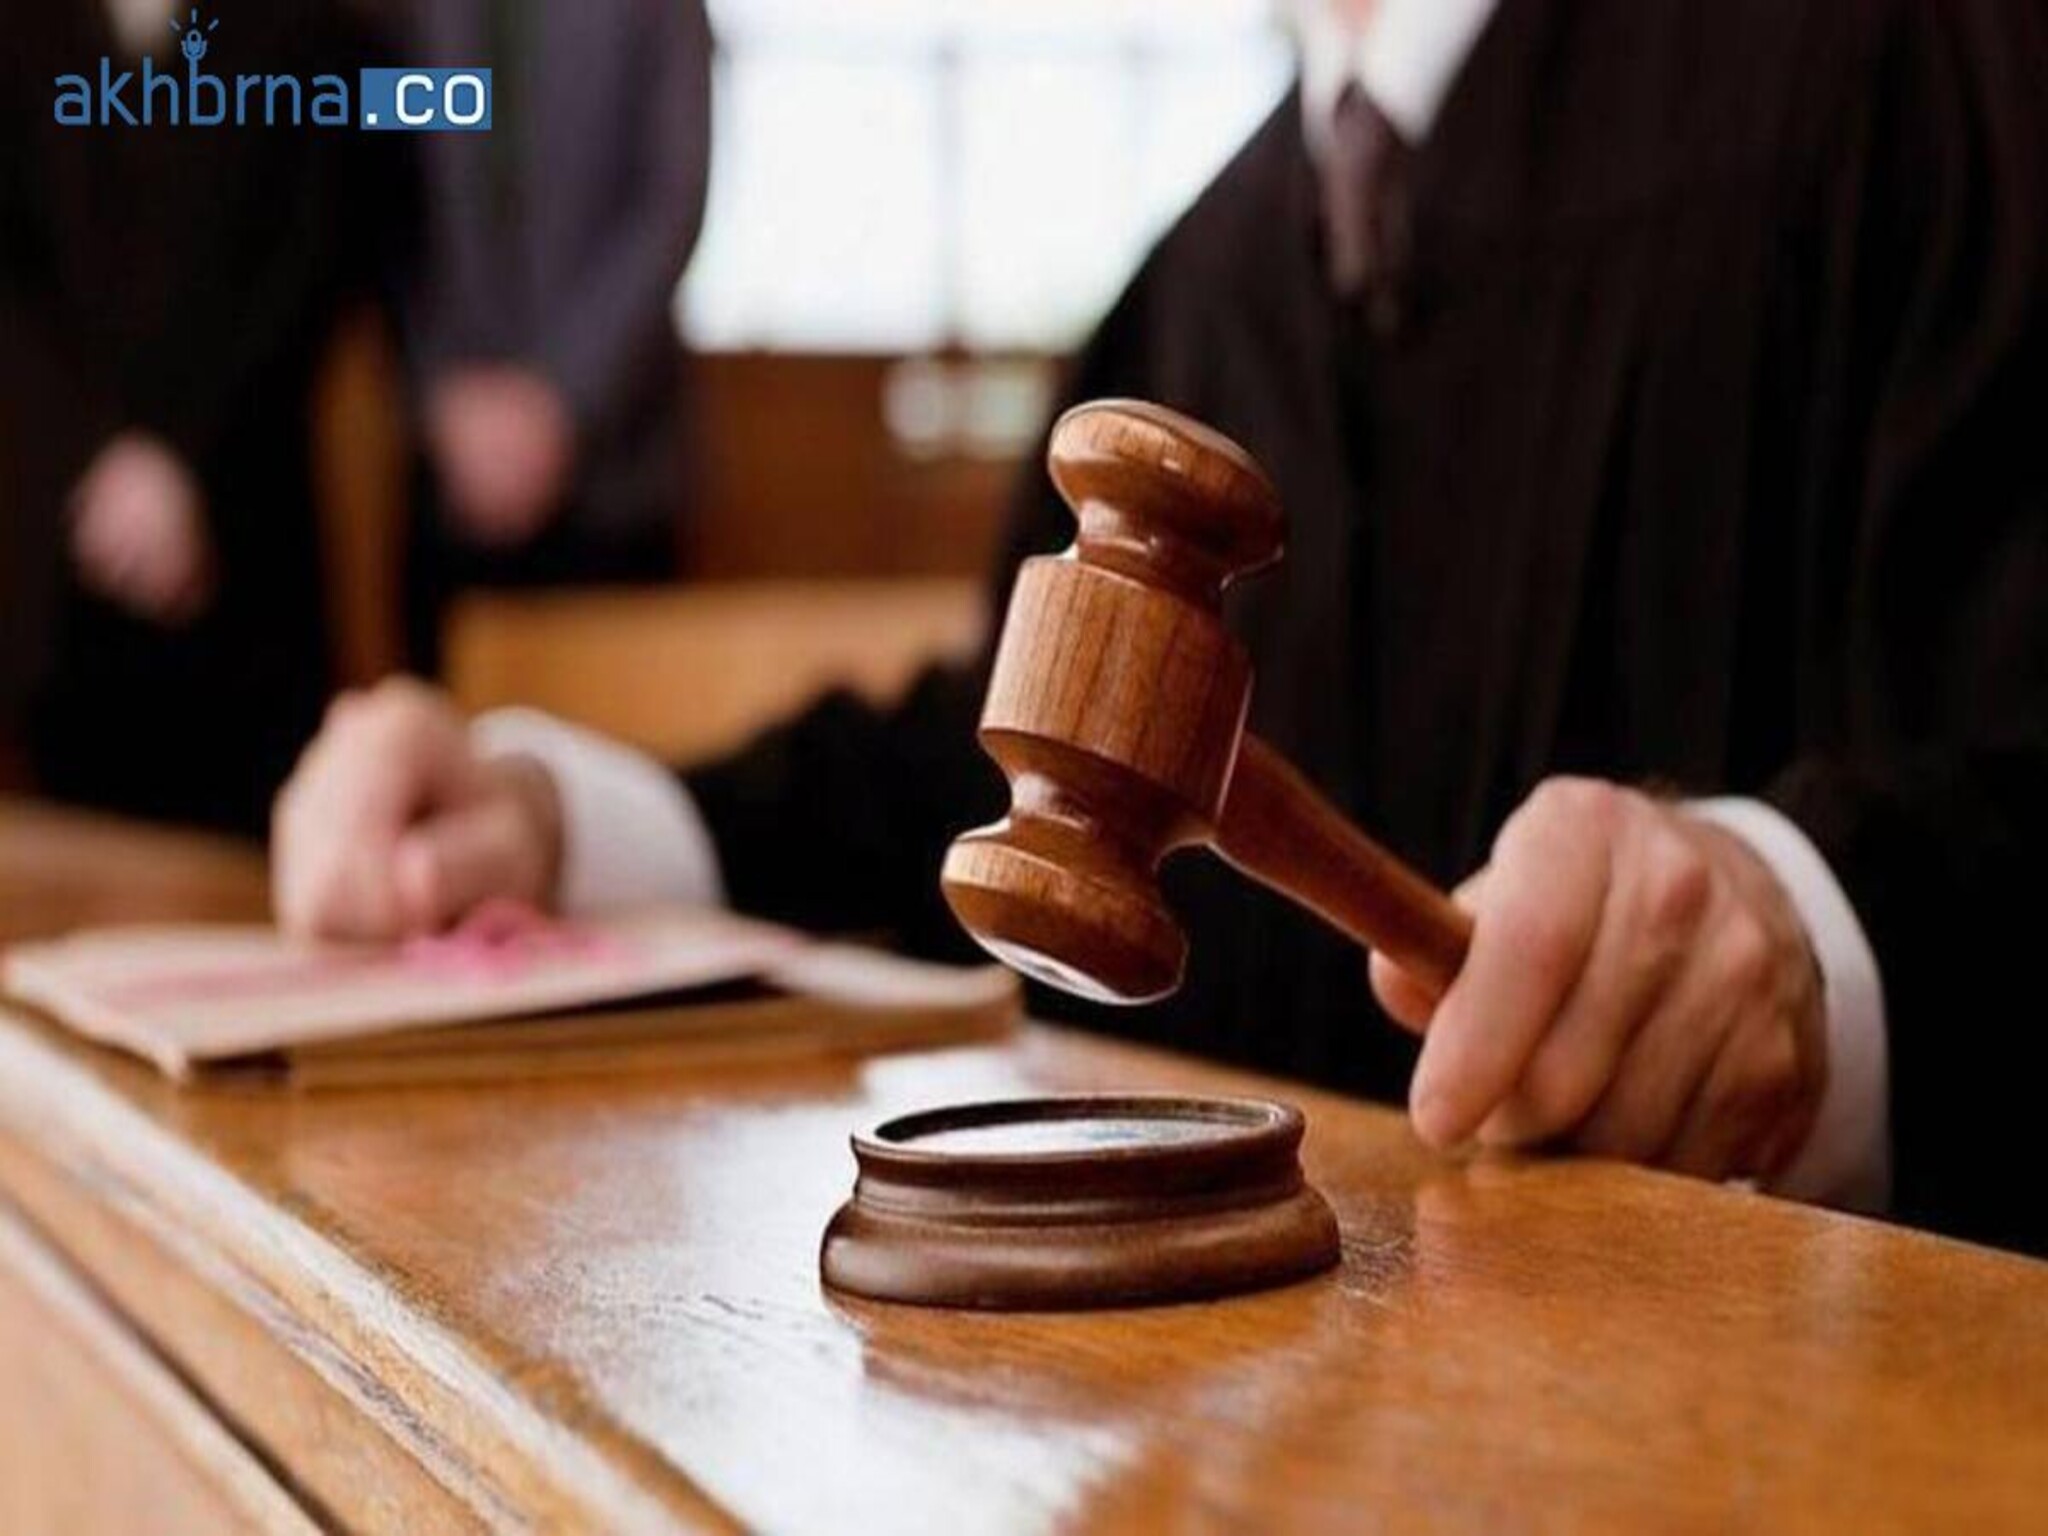 UAE Court Orders two Women to Pay 40,000 AED in compensation for insulting a man